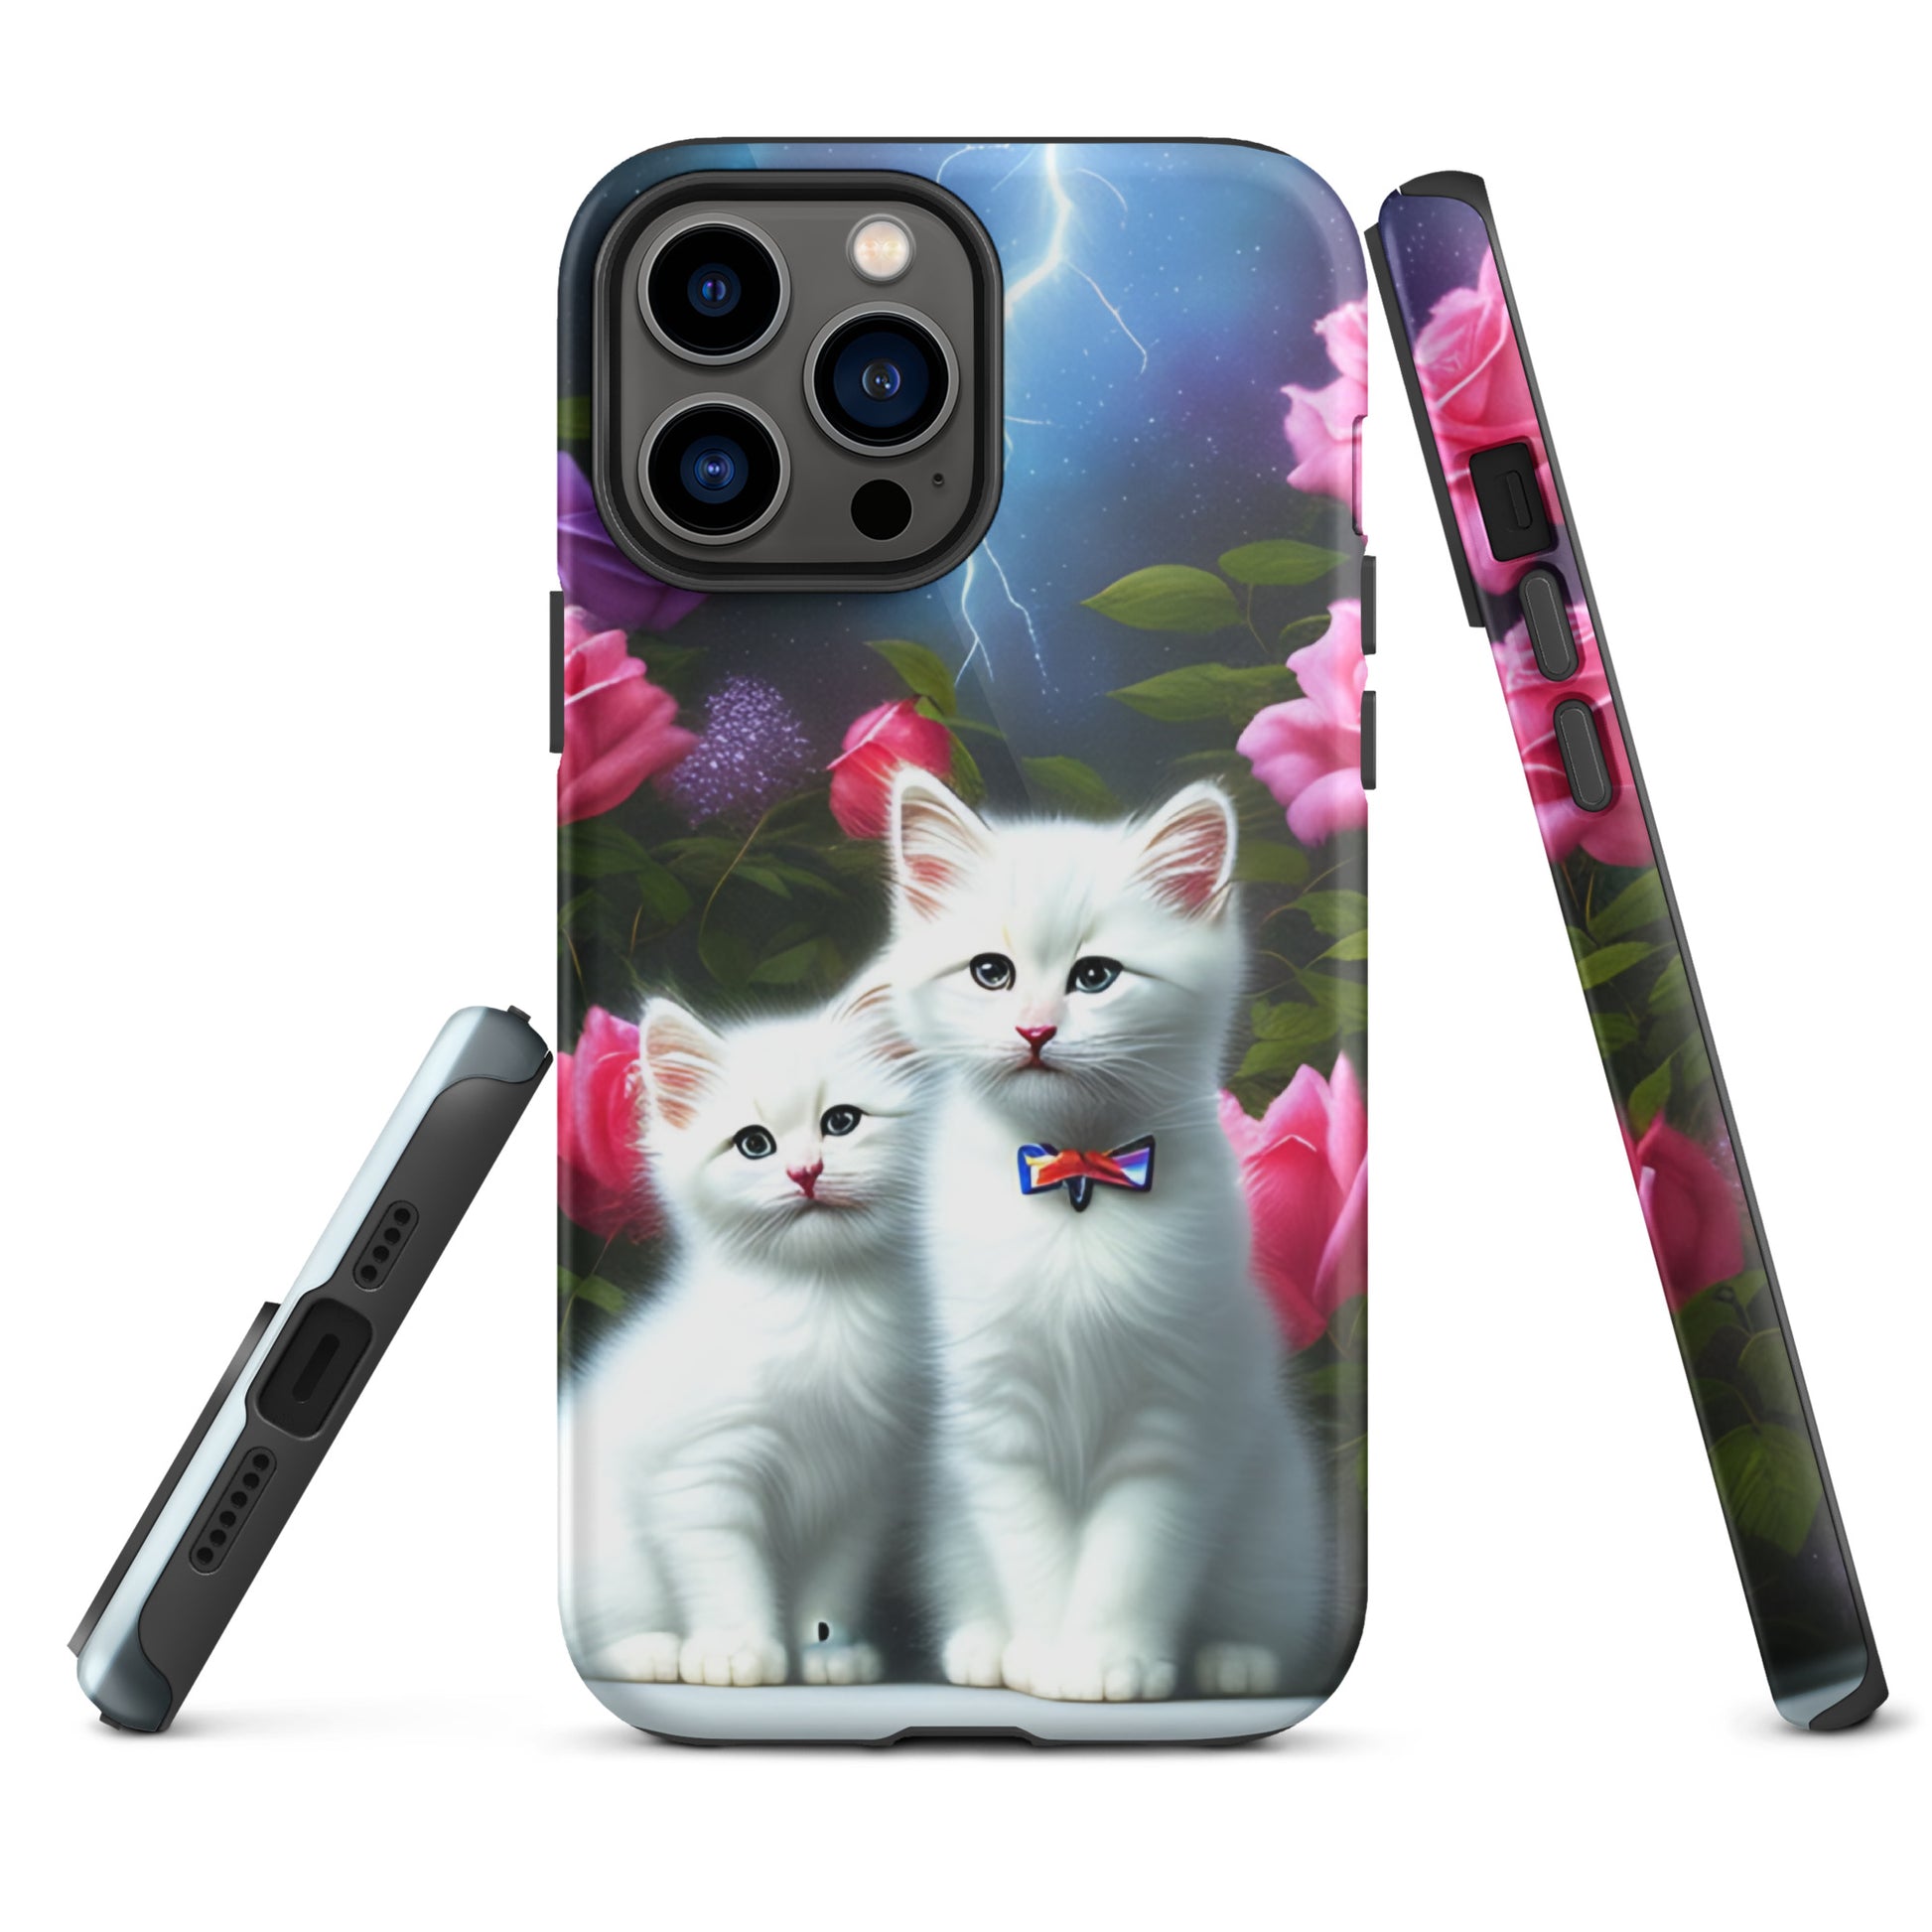 A picture of a iphone tough mobile phone case with 2 white kittens sitting in a flower garden and pink roses - glossy-iphone-13-pro-max-front